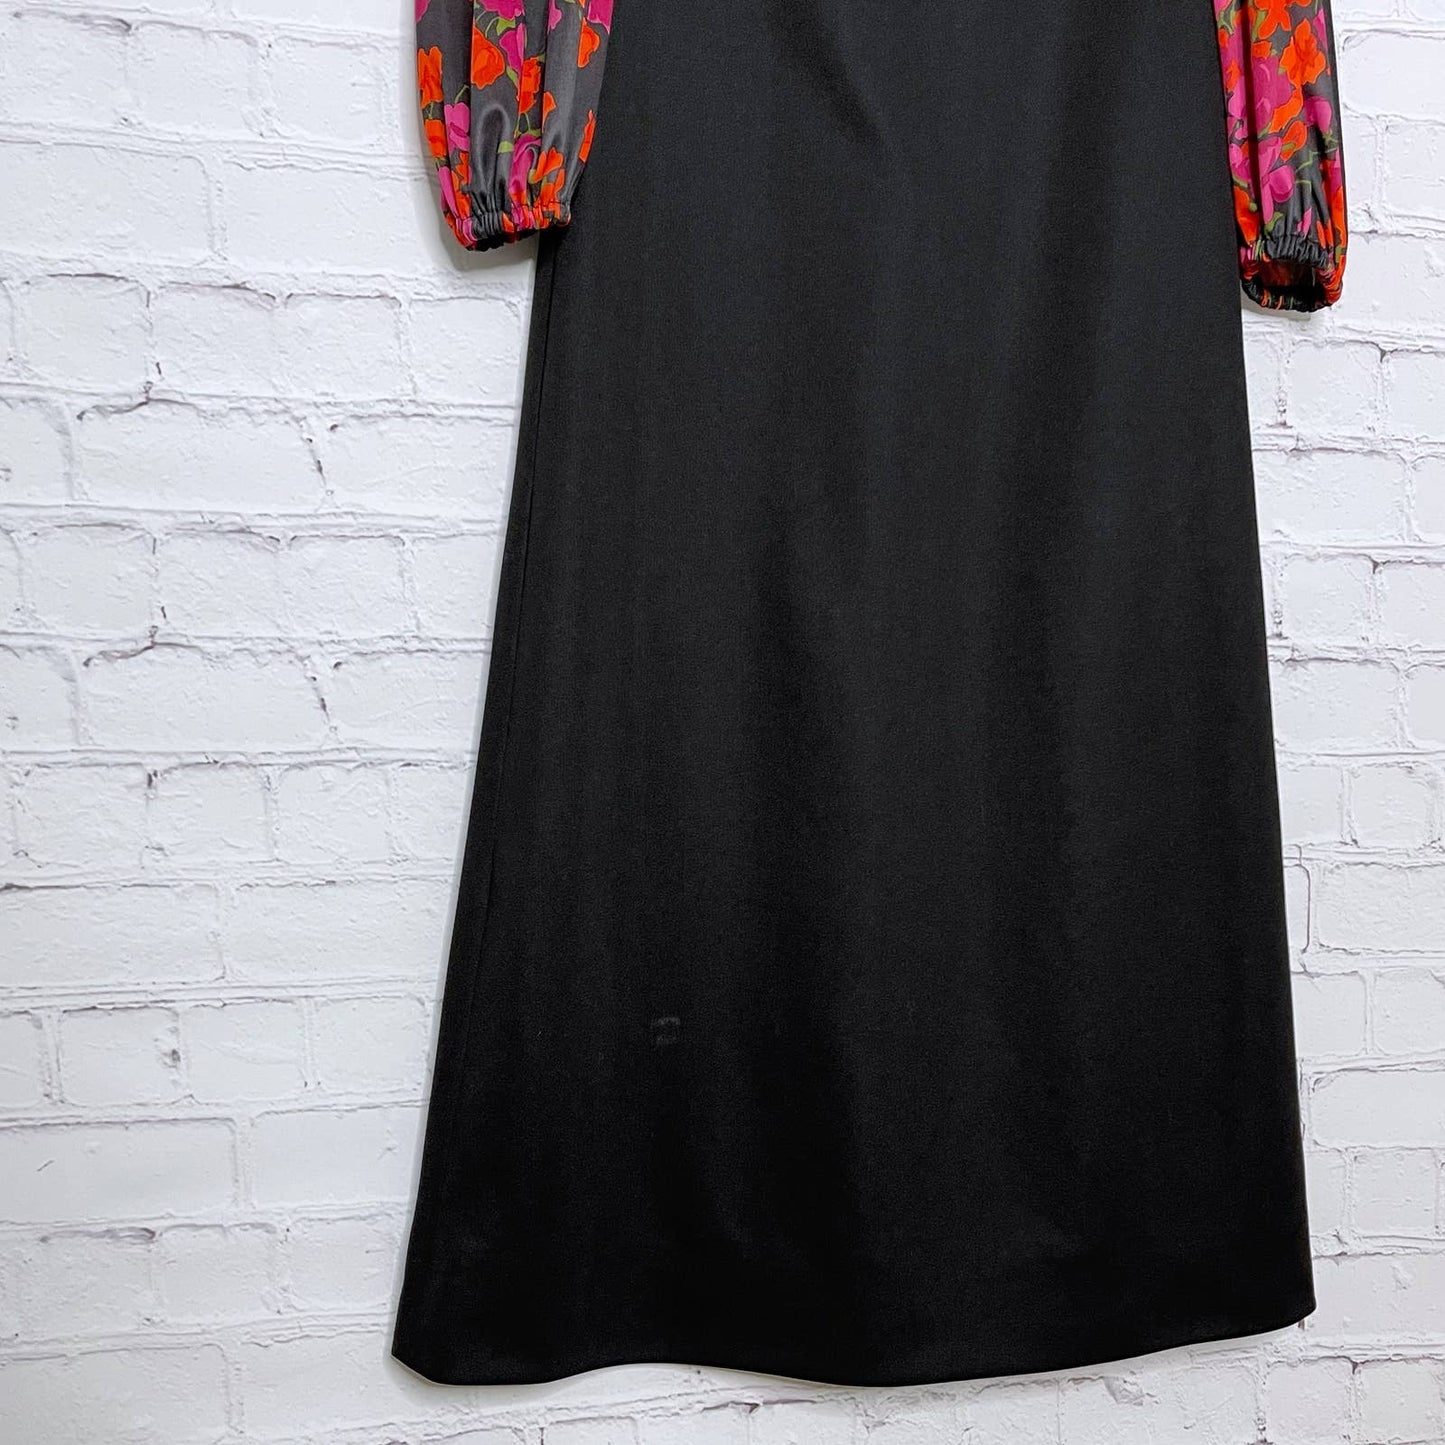 Vintage 70s Black Maxi Dress with Floral Contrast Long Sleeves Size M L